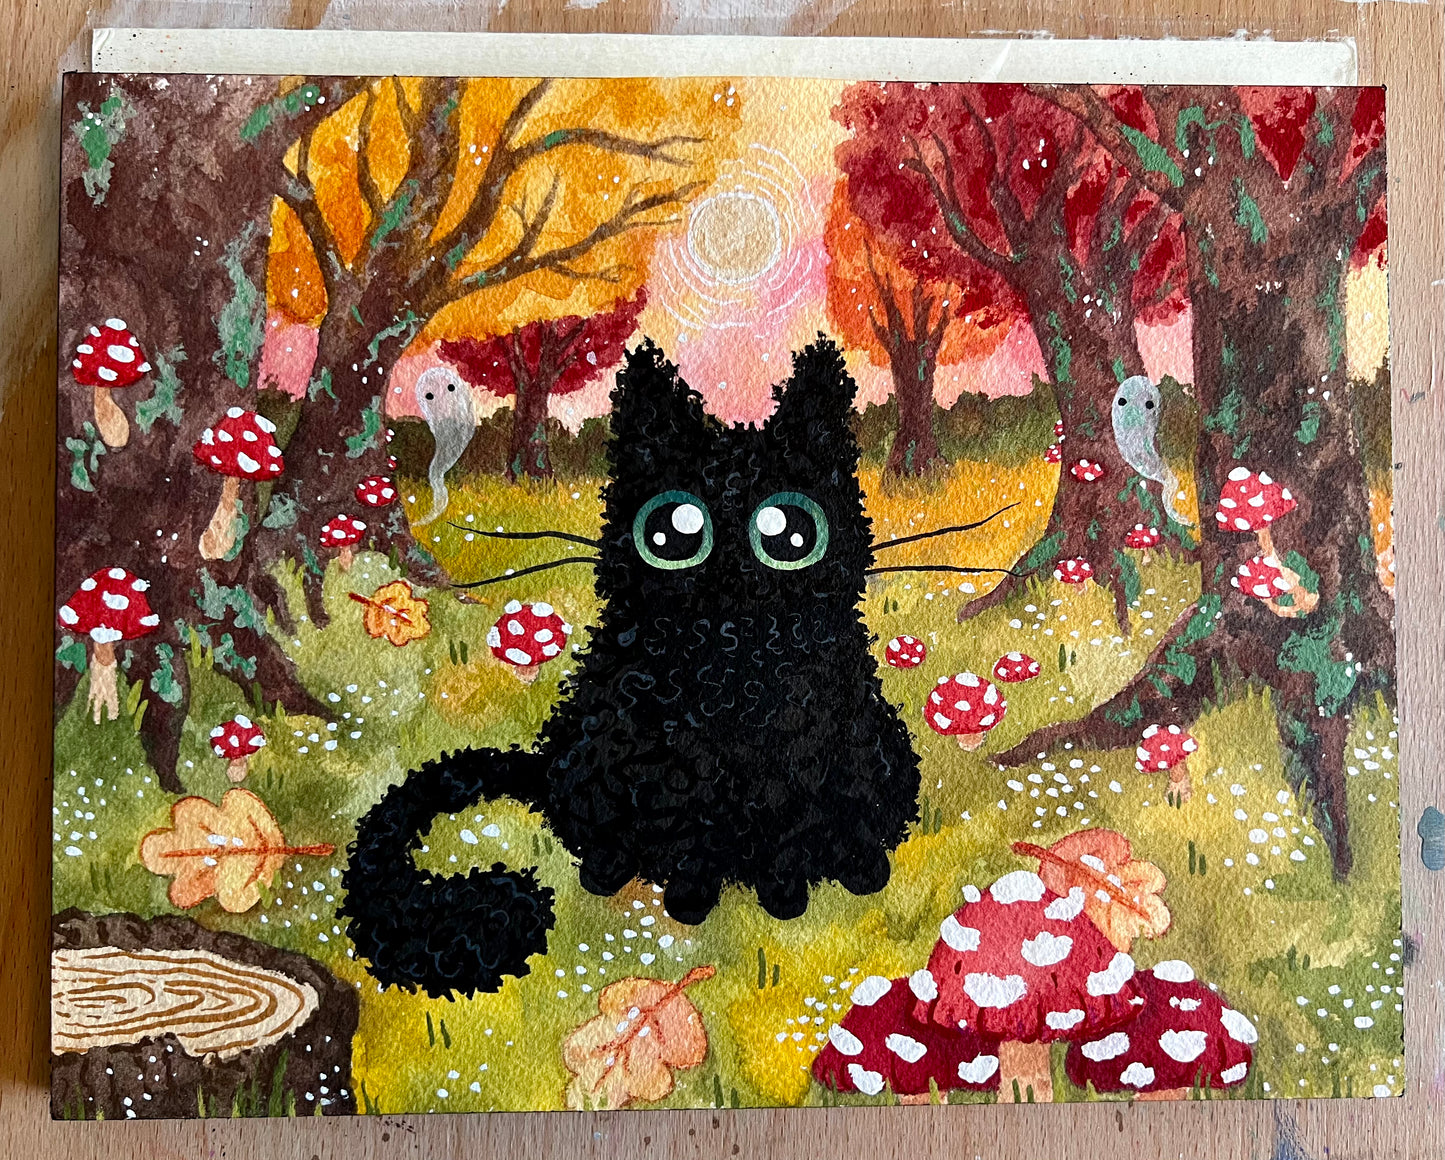 Scraggly Black Cat Painting